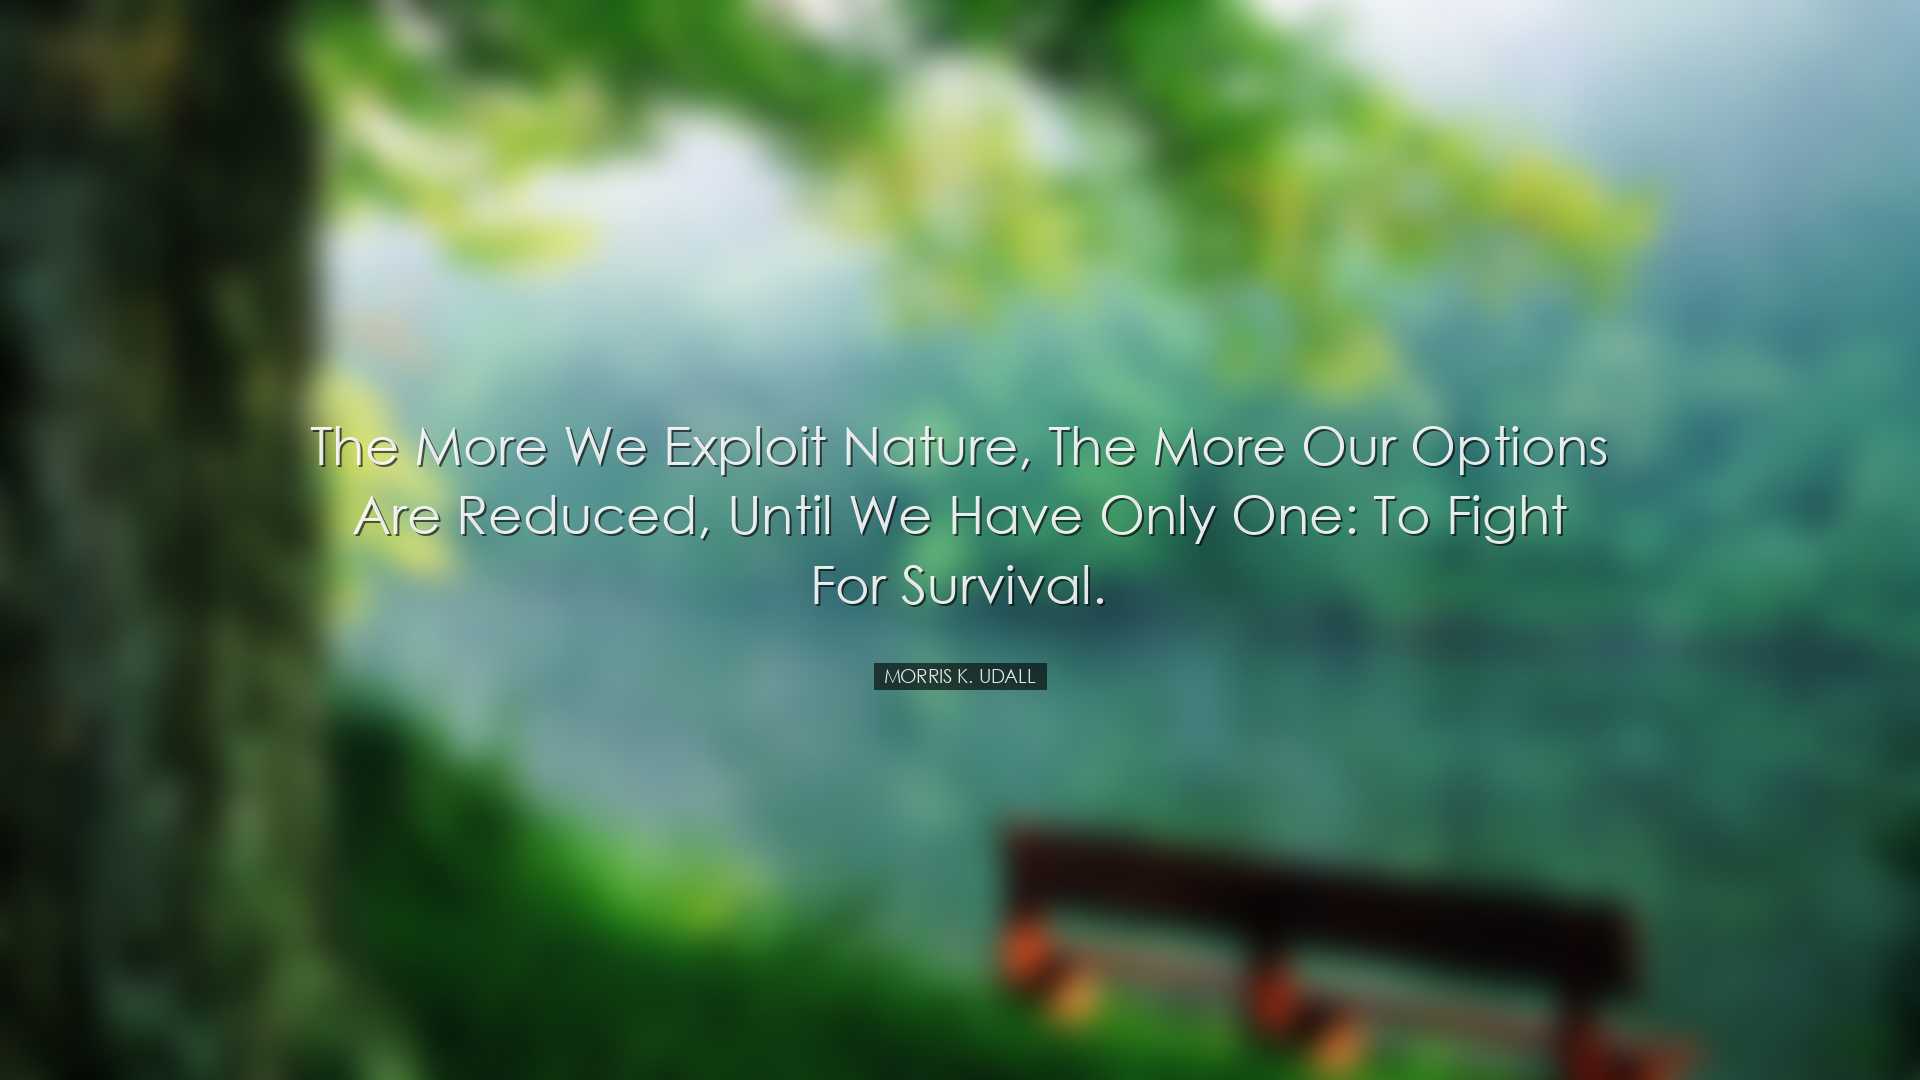 The more we exploit nature, The more our options are reduced, unti